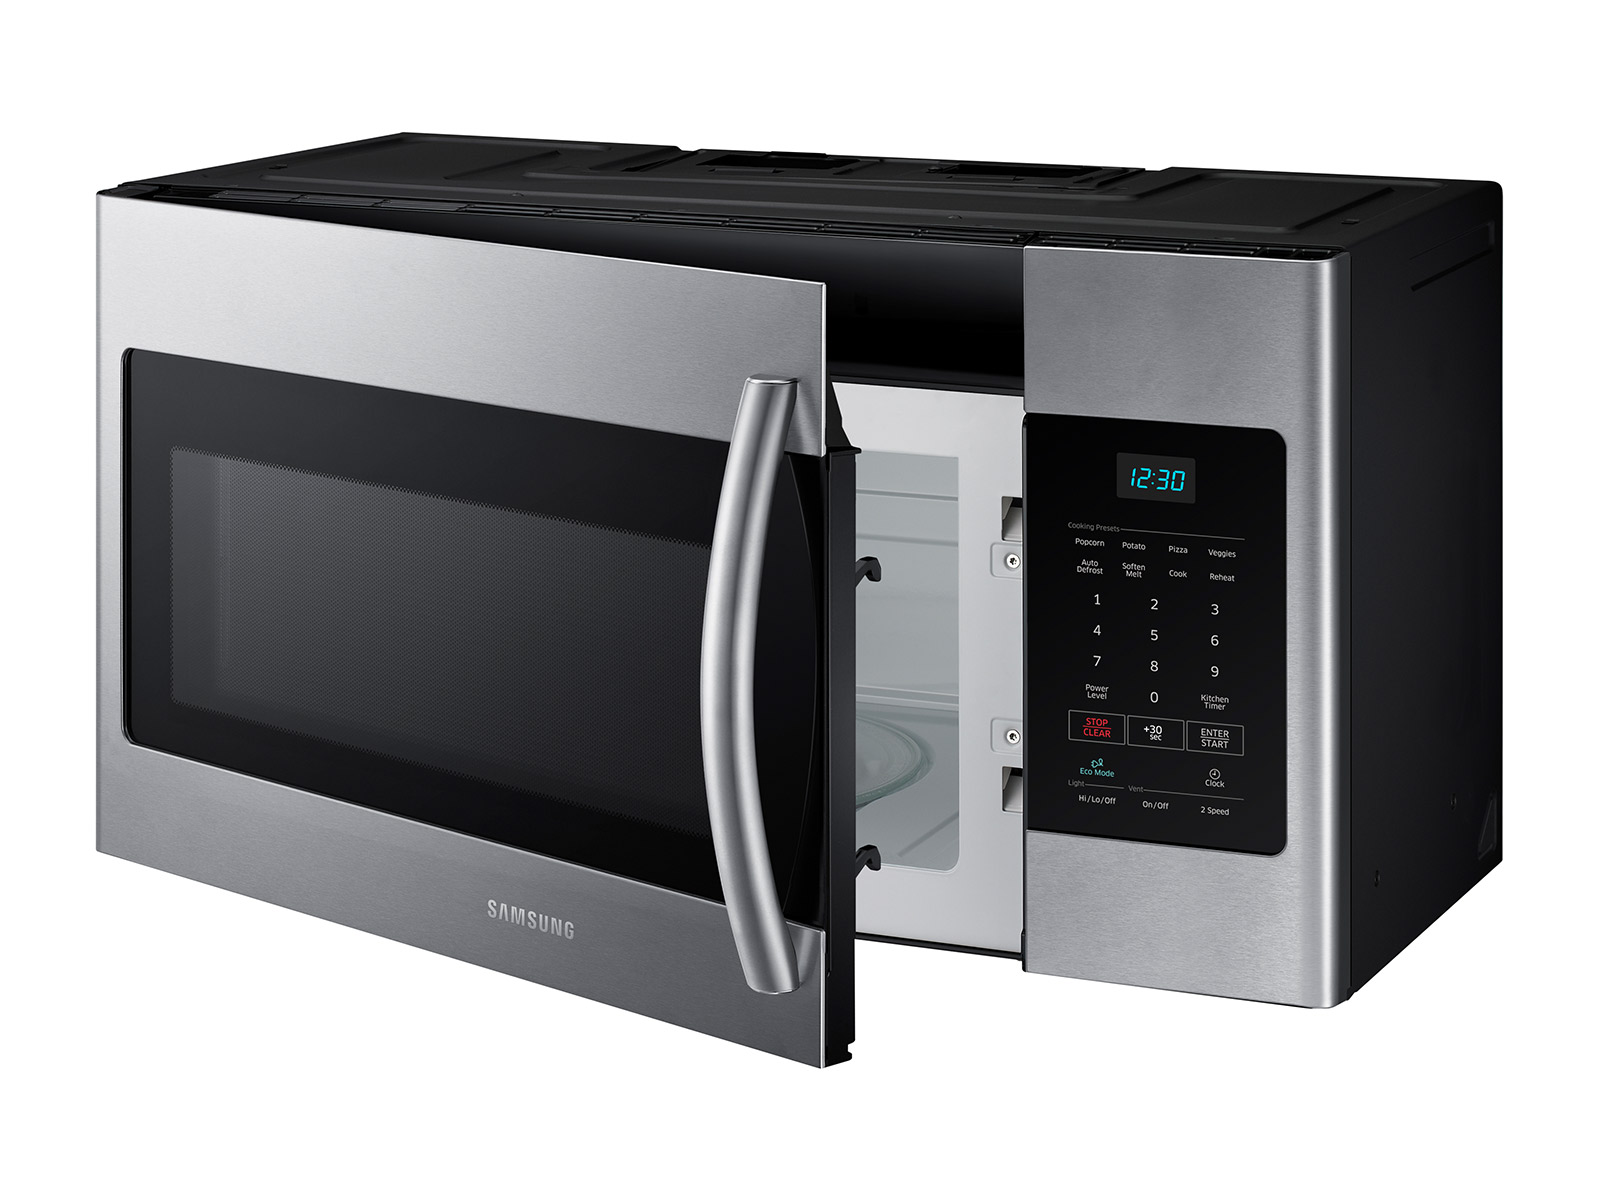 Best microwave accessories to buy